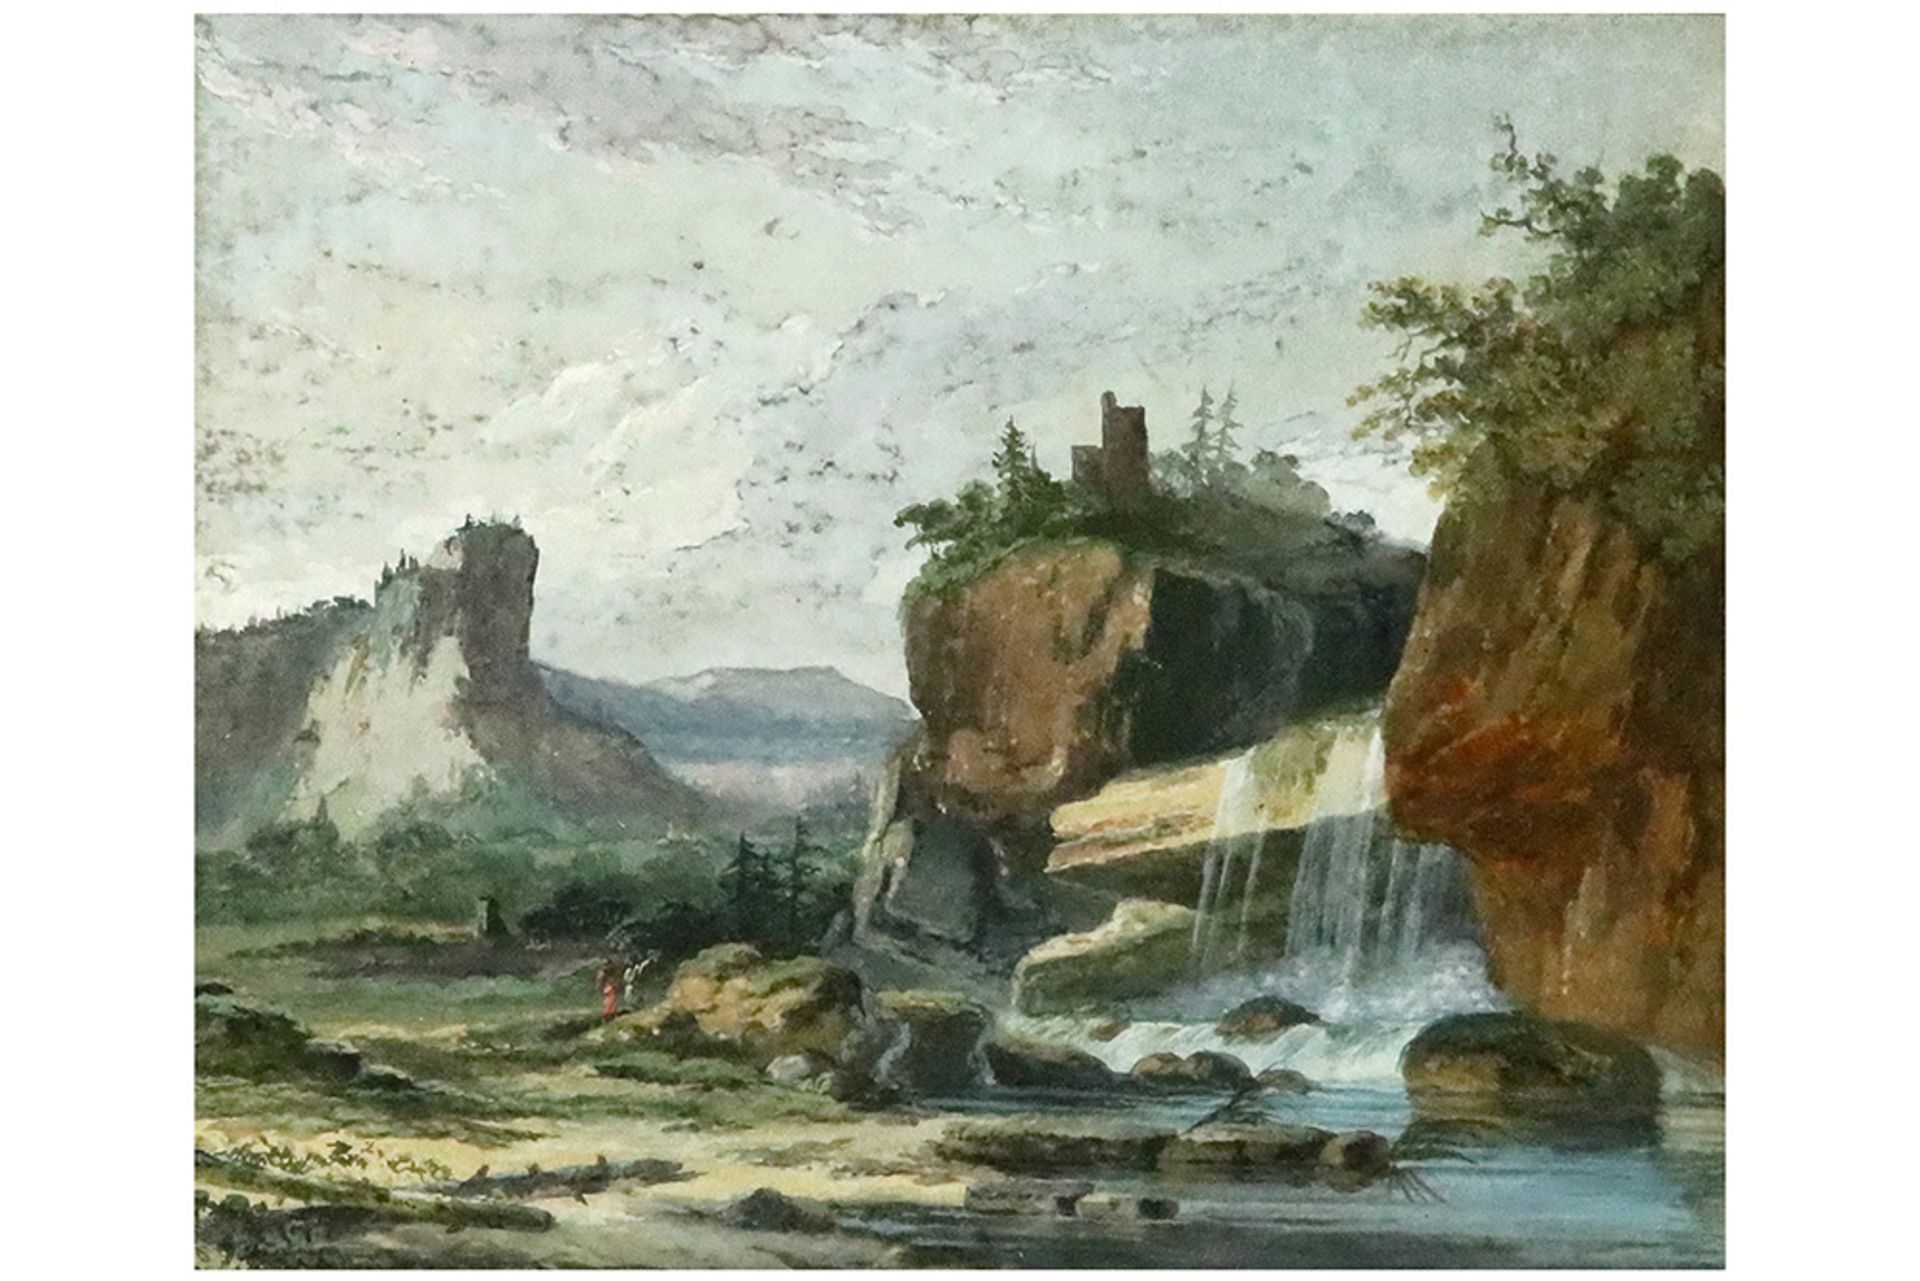 18th Cent. Italian "Animated landscape with figures near a waterfall" gouache || ITALIË - 18° EEUW